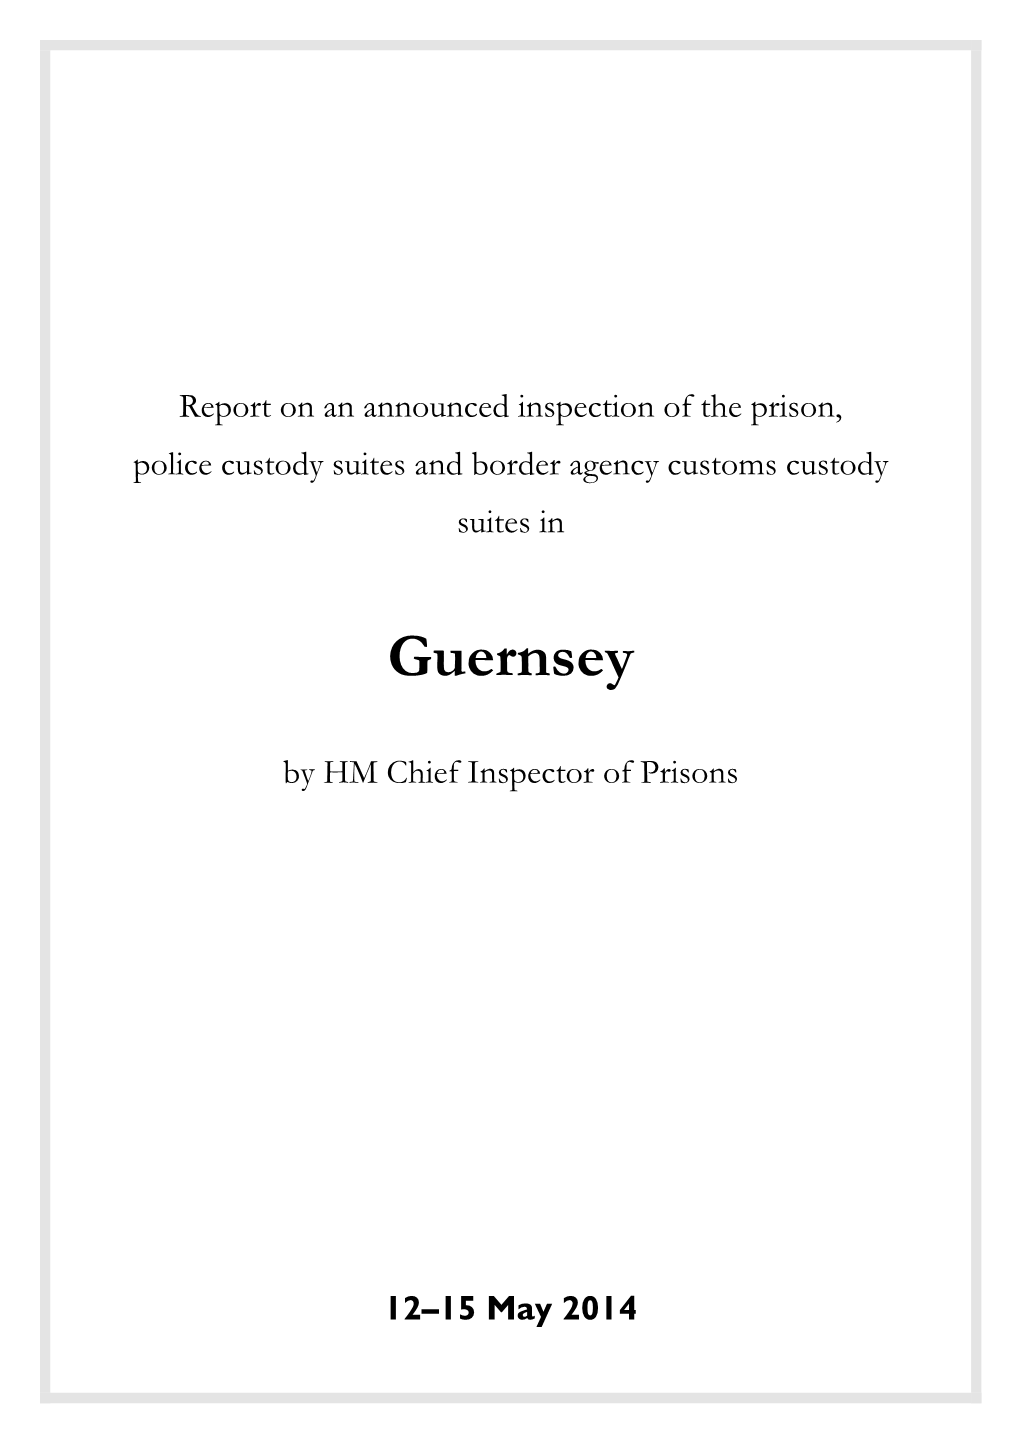 Report on an Announced Inspection of the Prison, Police Custody Suites and Border Agency Customs Custody Suites In